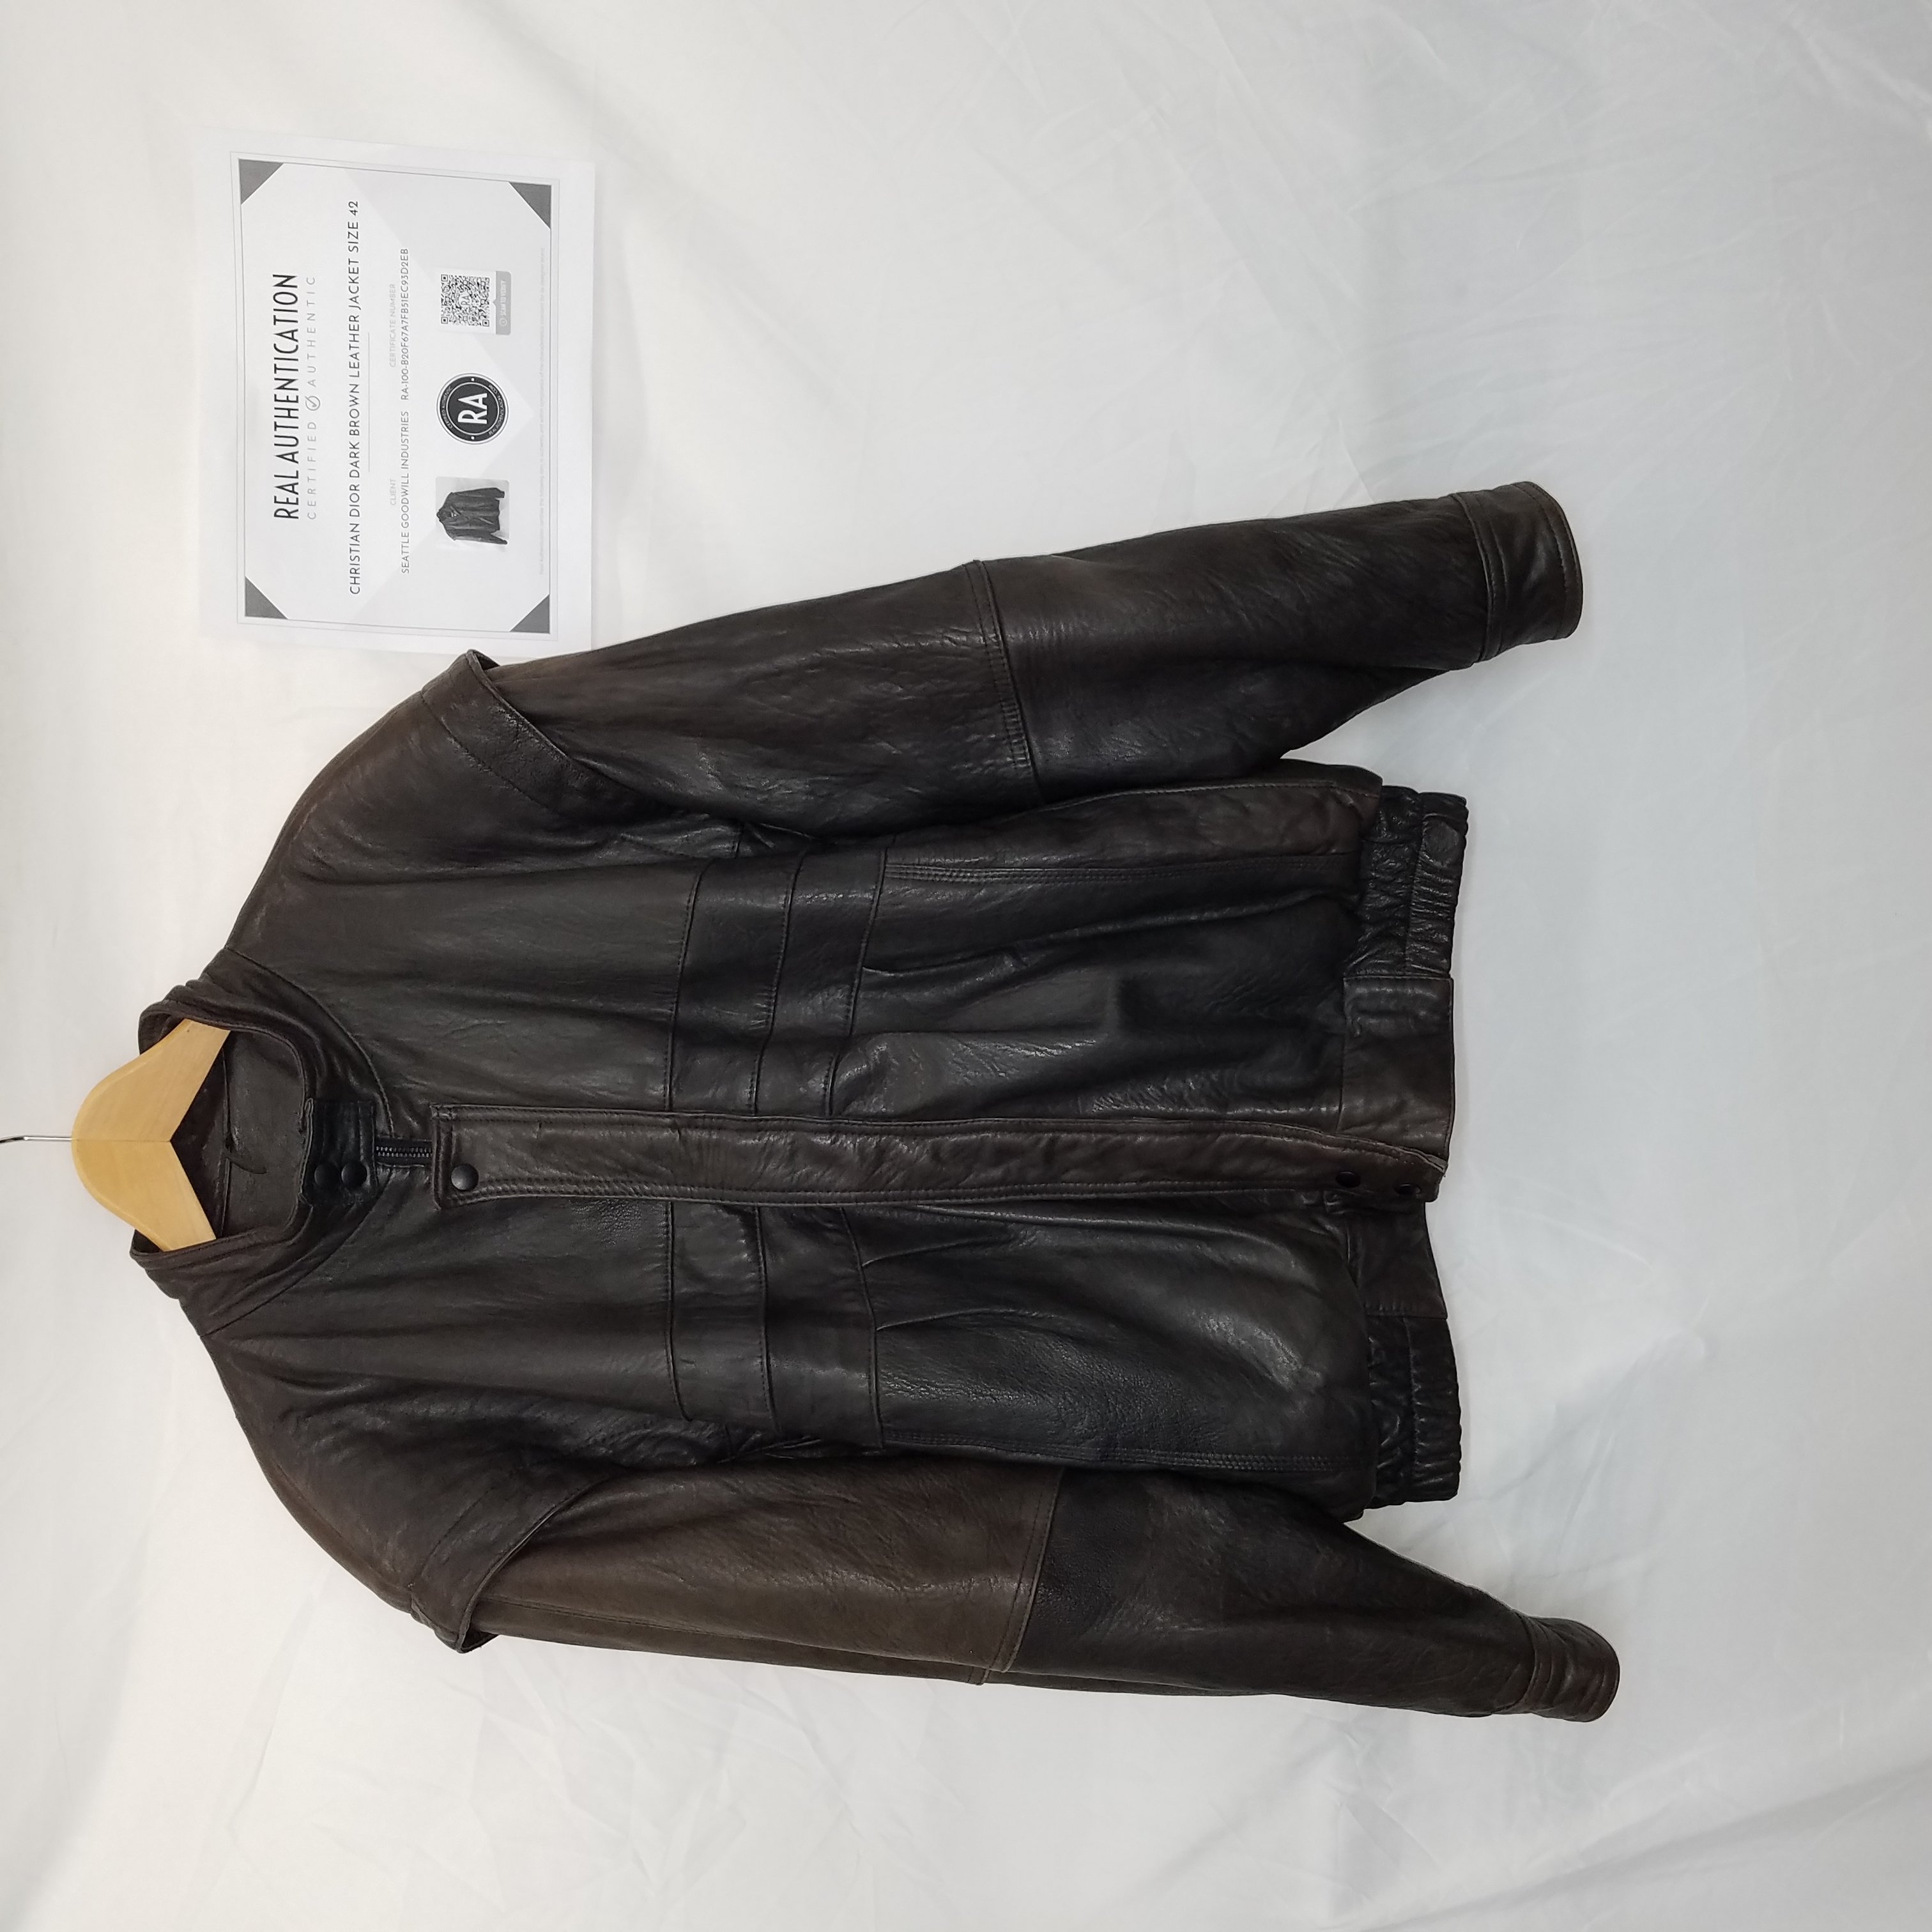 Christian Dior Dior Homme Leather Jacket 535  TheRealReal  Lookastic